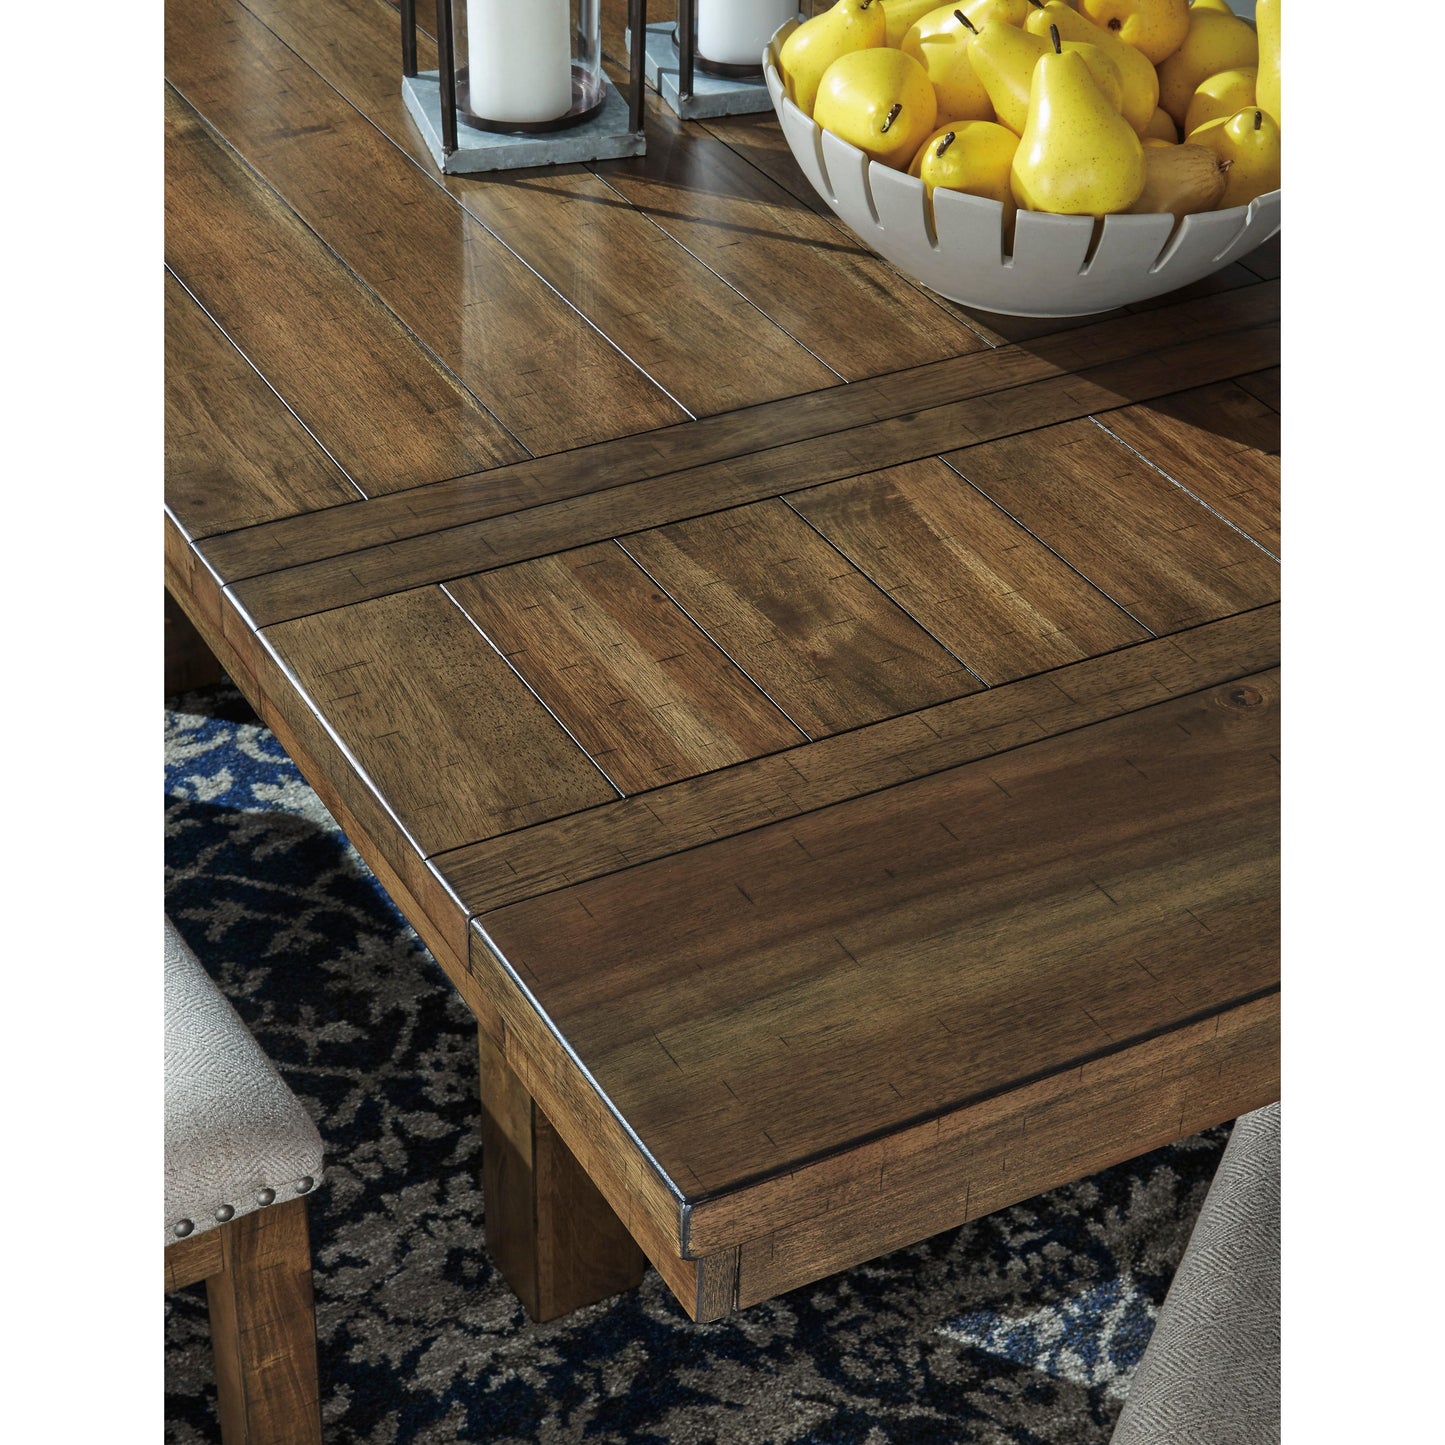 Signature Design by Ashley Moriville Dining Table with Trestle Base D631-45